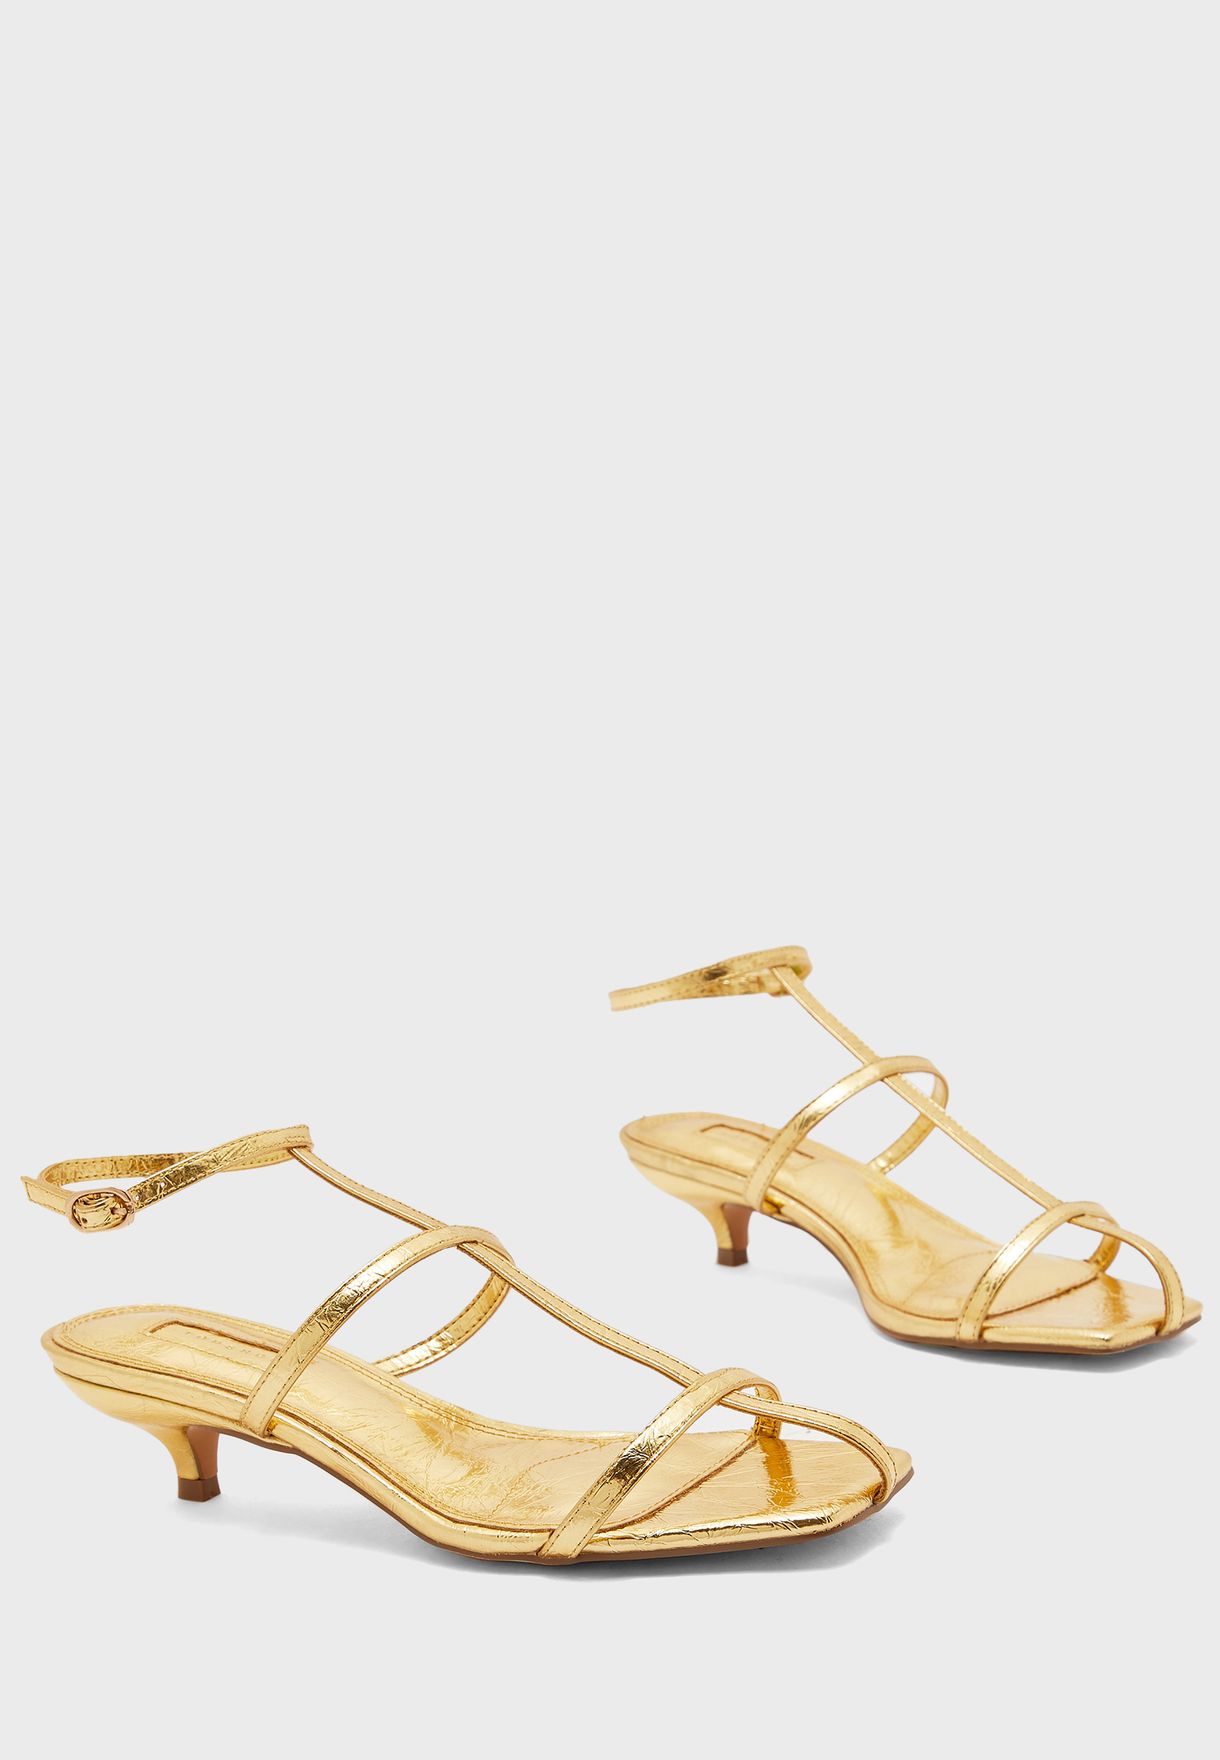 gold strappy sandals low heel